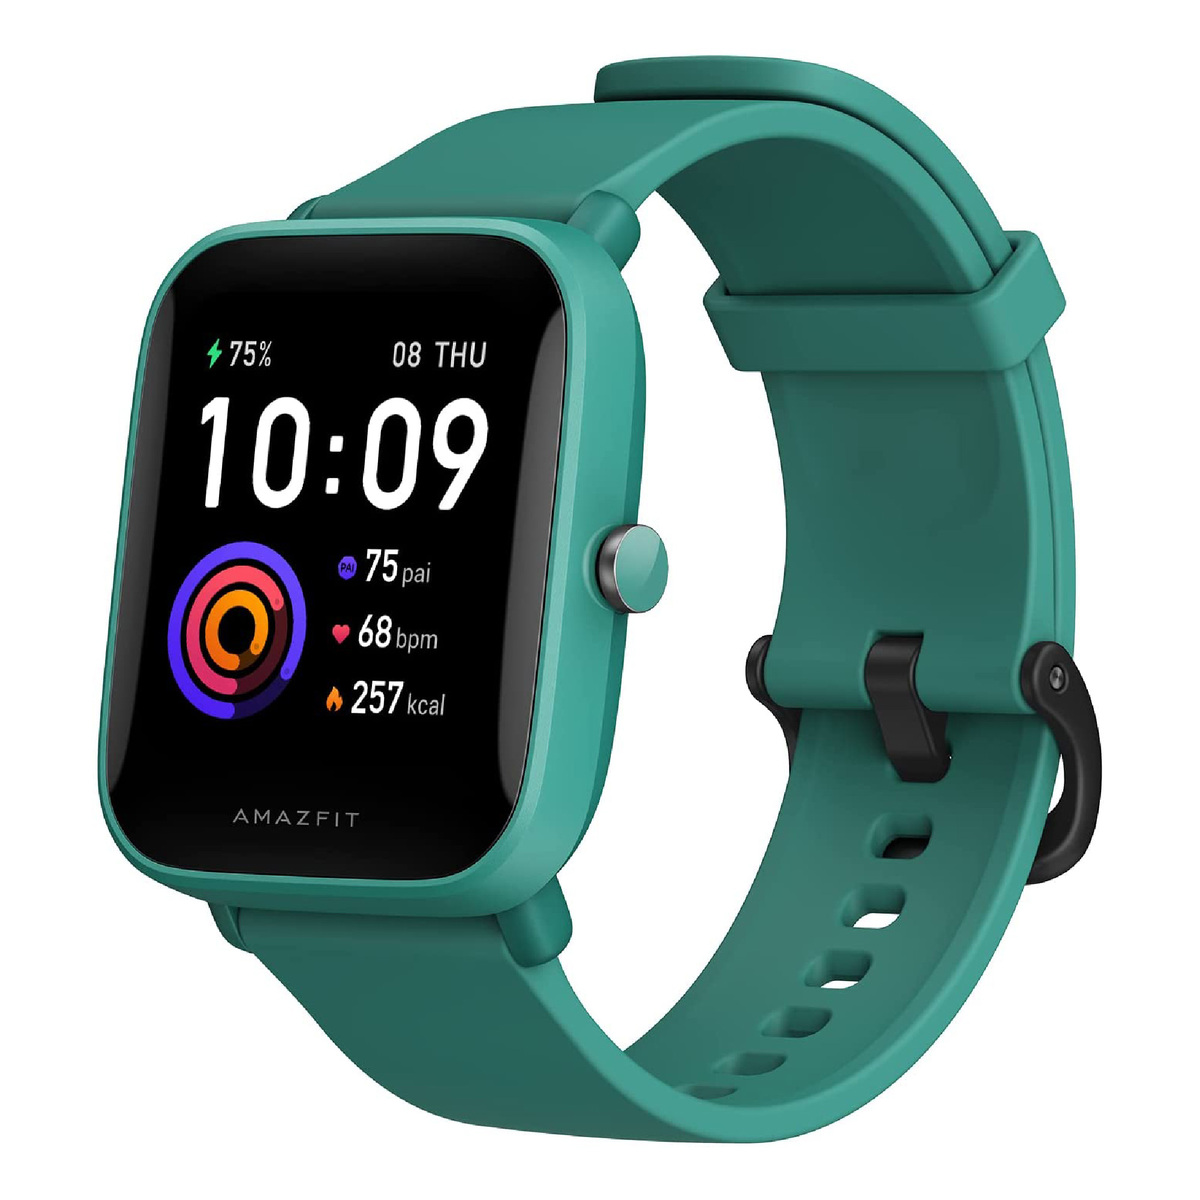 Amazfit BIP-U Pro Smartwatch ,Heart Rate and Activity Tracking, Sleep Monitoring, Built-In GPS,Green (A2008 BIP-U Pro)